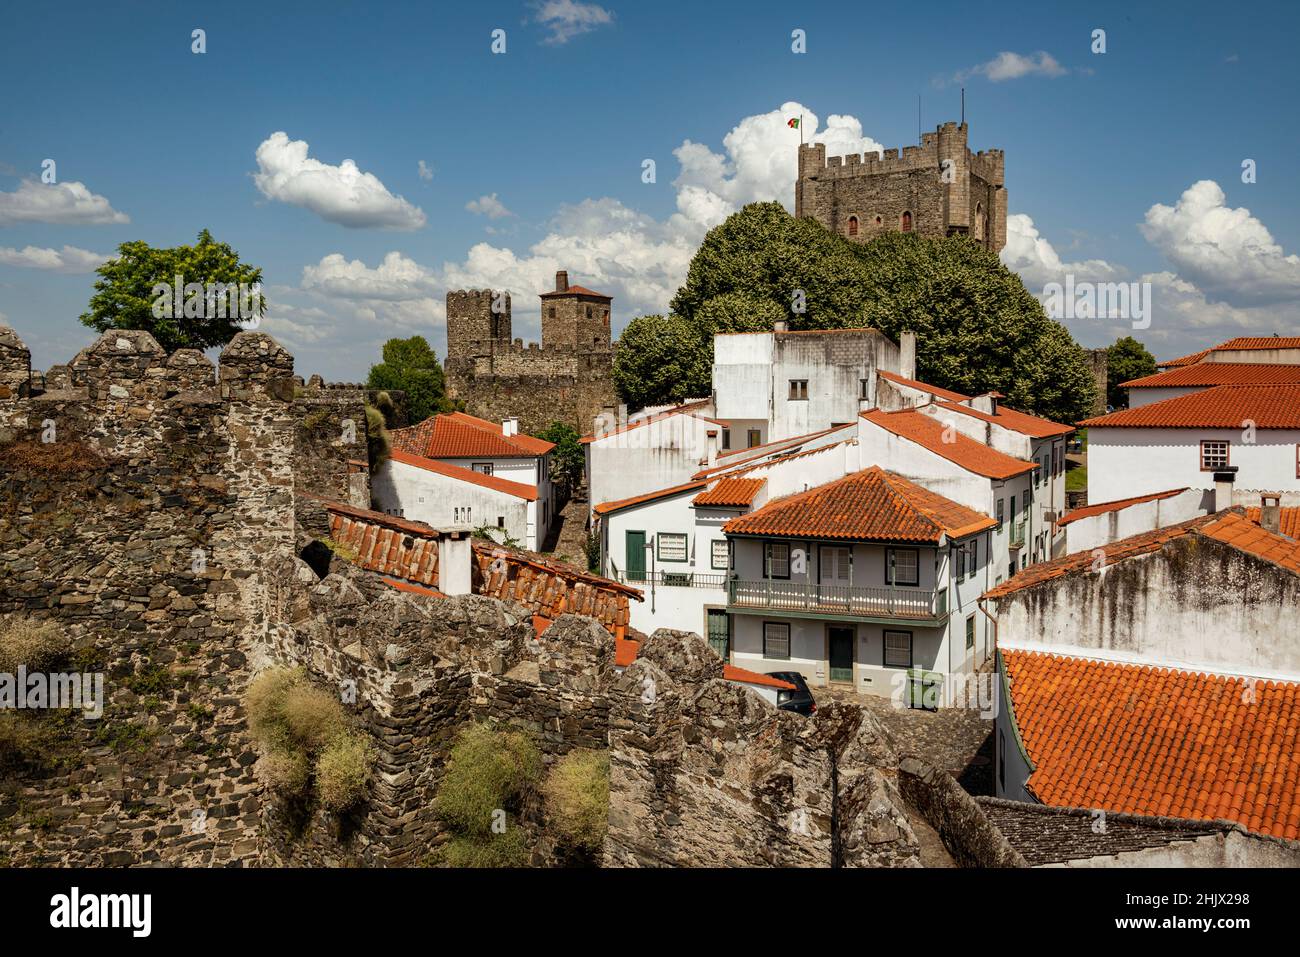 View towards the tower of 'Castelo de Bragança' castle surrounded by white houses with red rooftops, Bragança district, Montesinho, Portugal Stock Photo